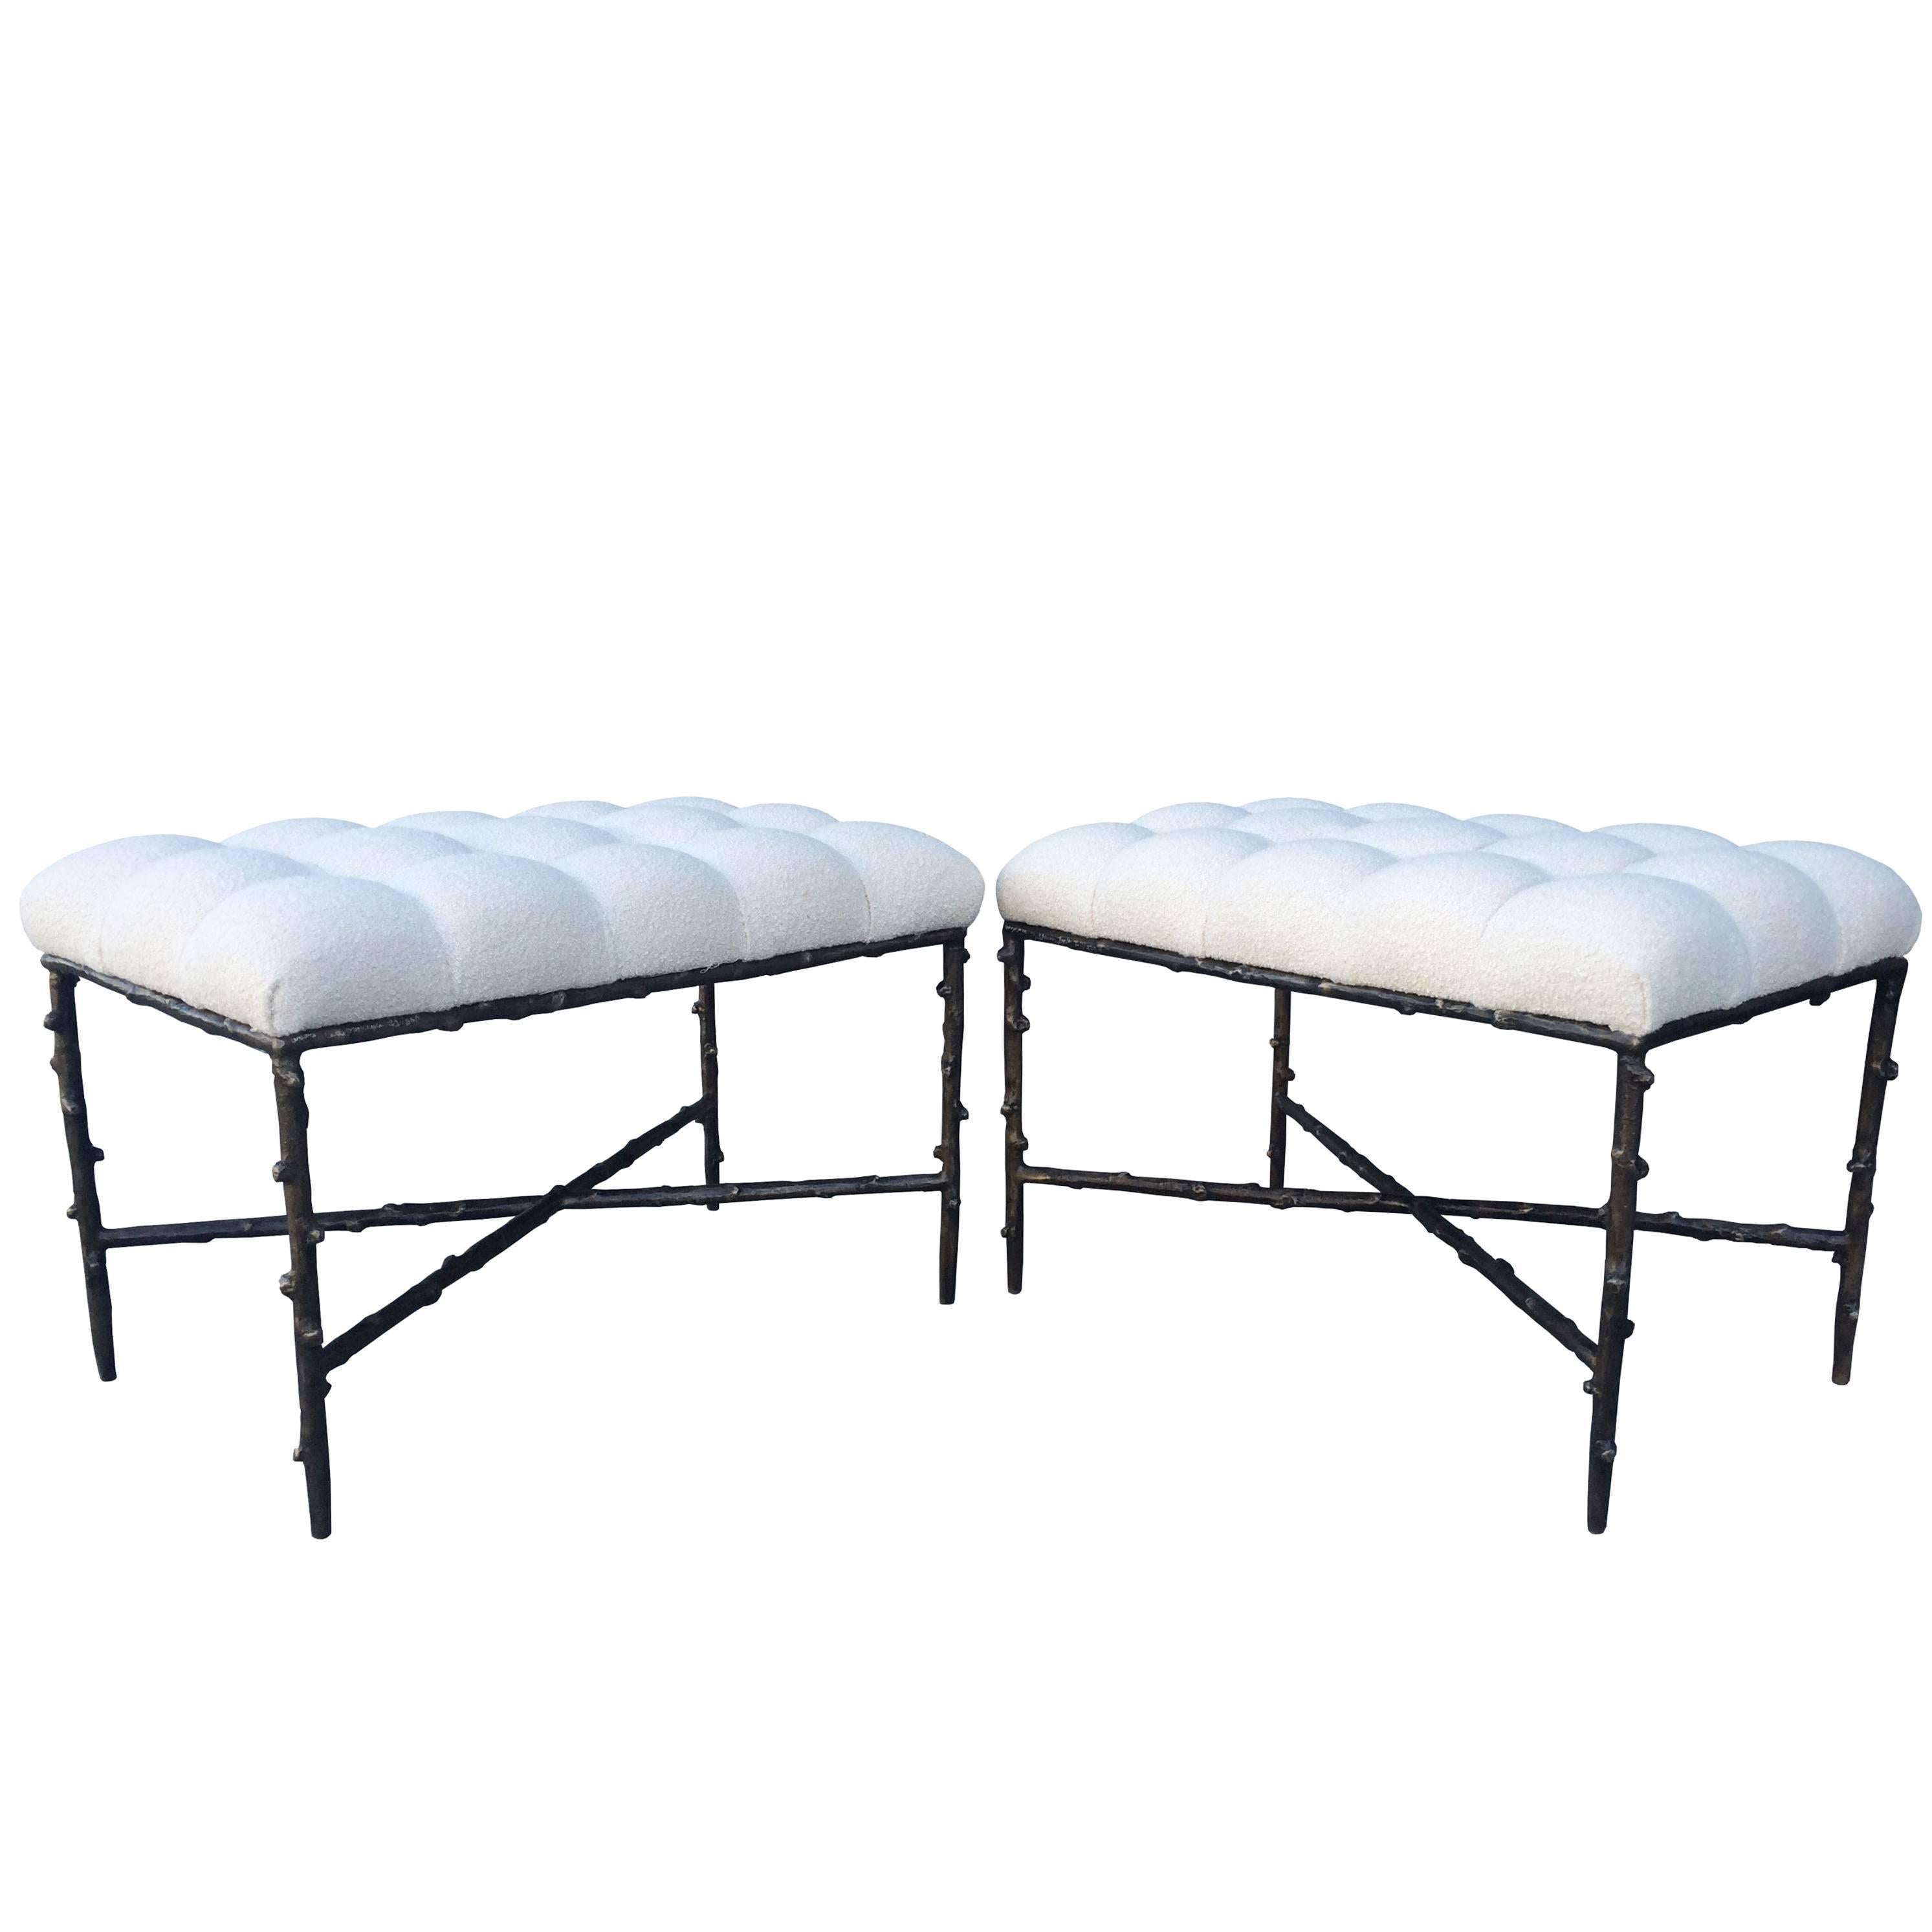 Solid Bronze Benches with Tufted Seats, Limited Edition of 200, Numbers 1 and 2